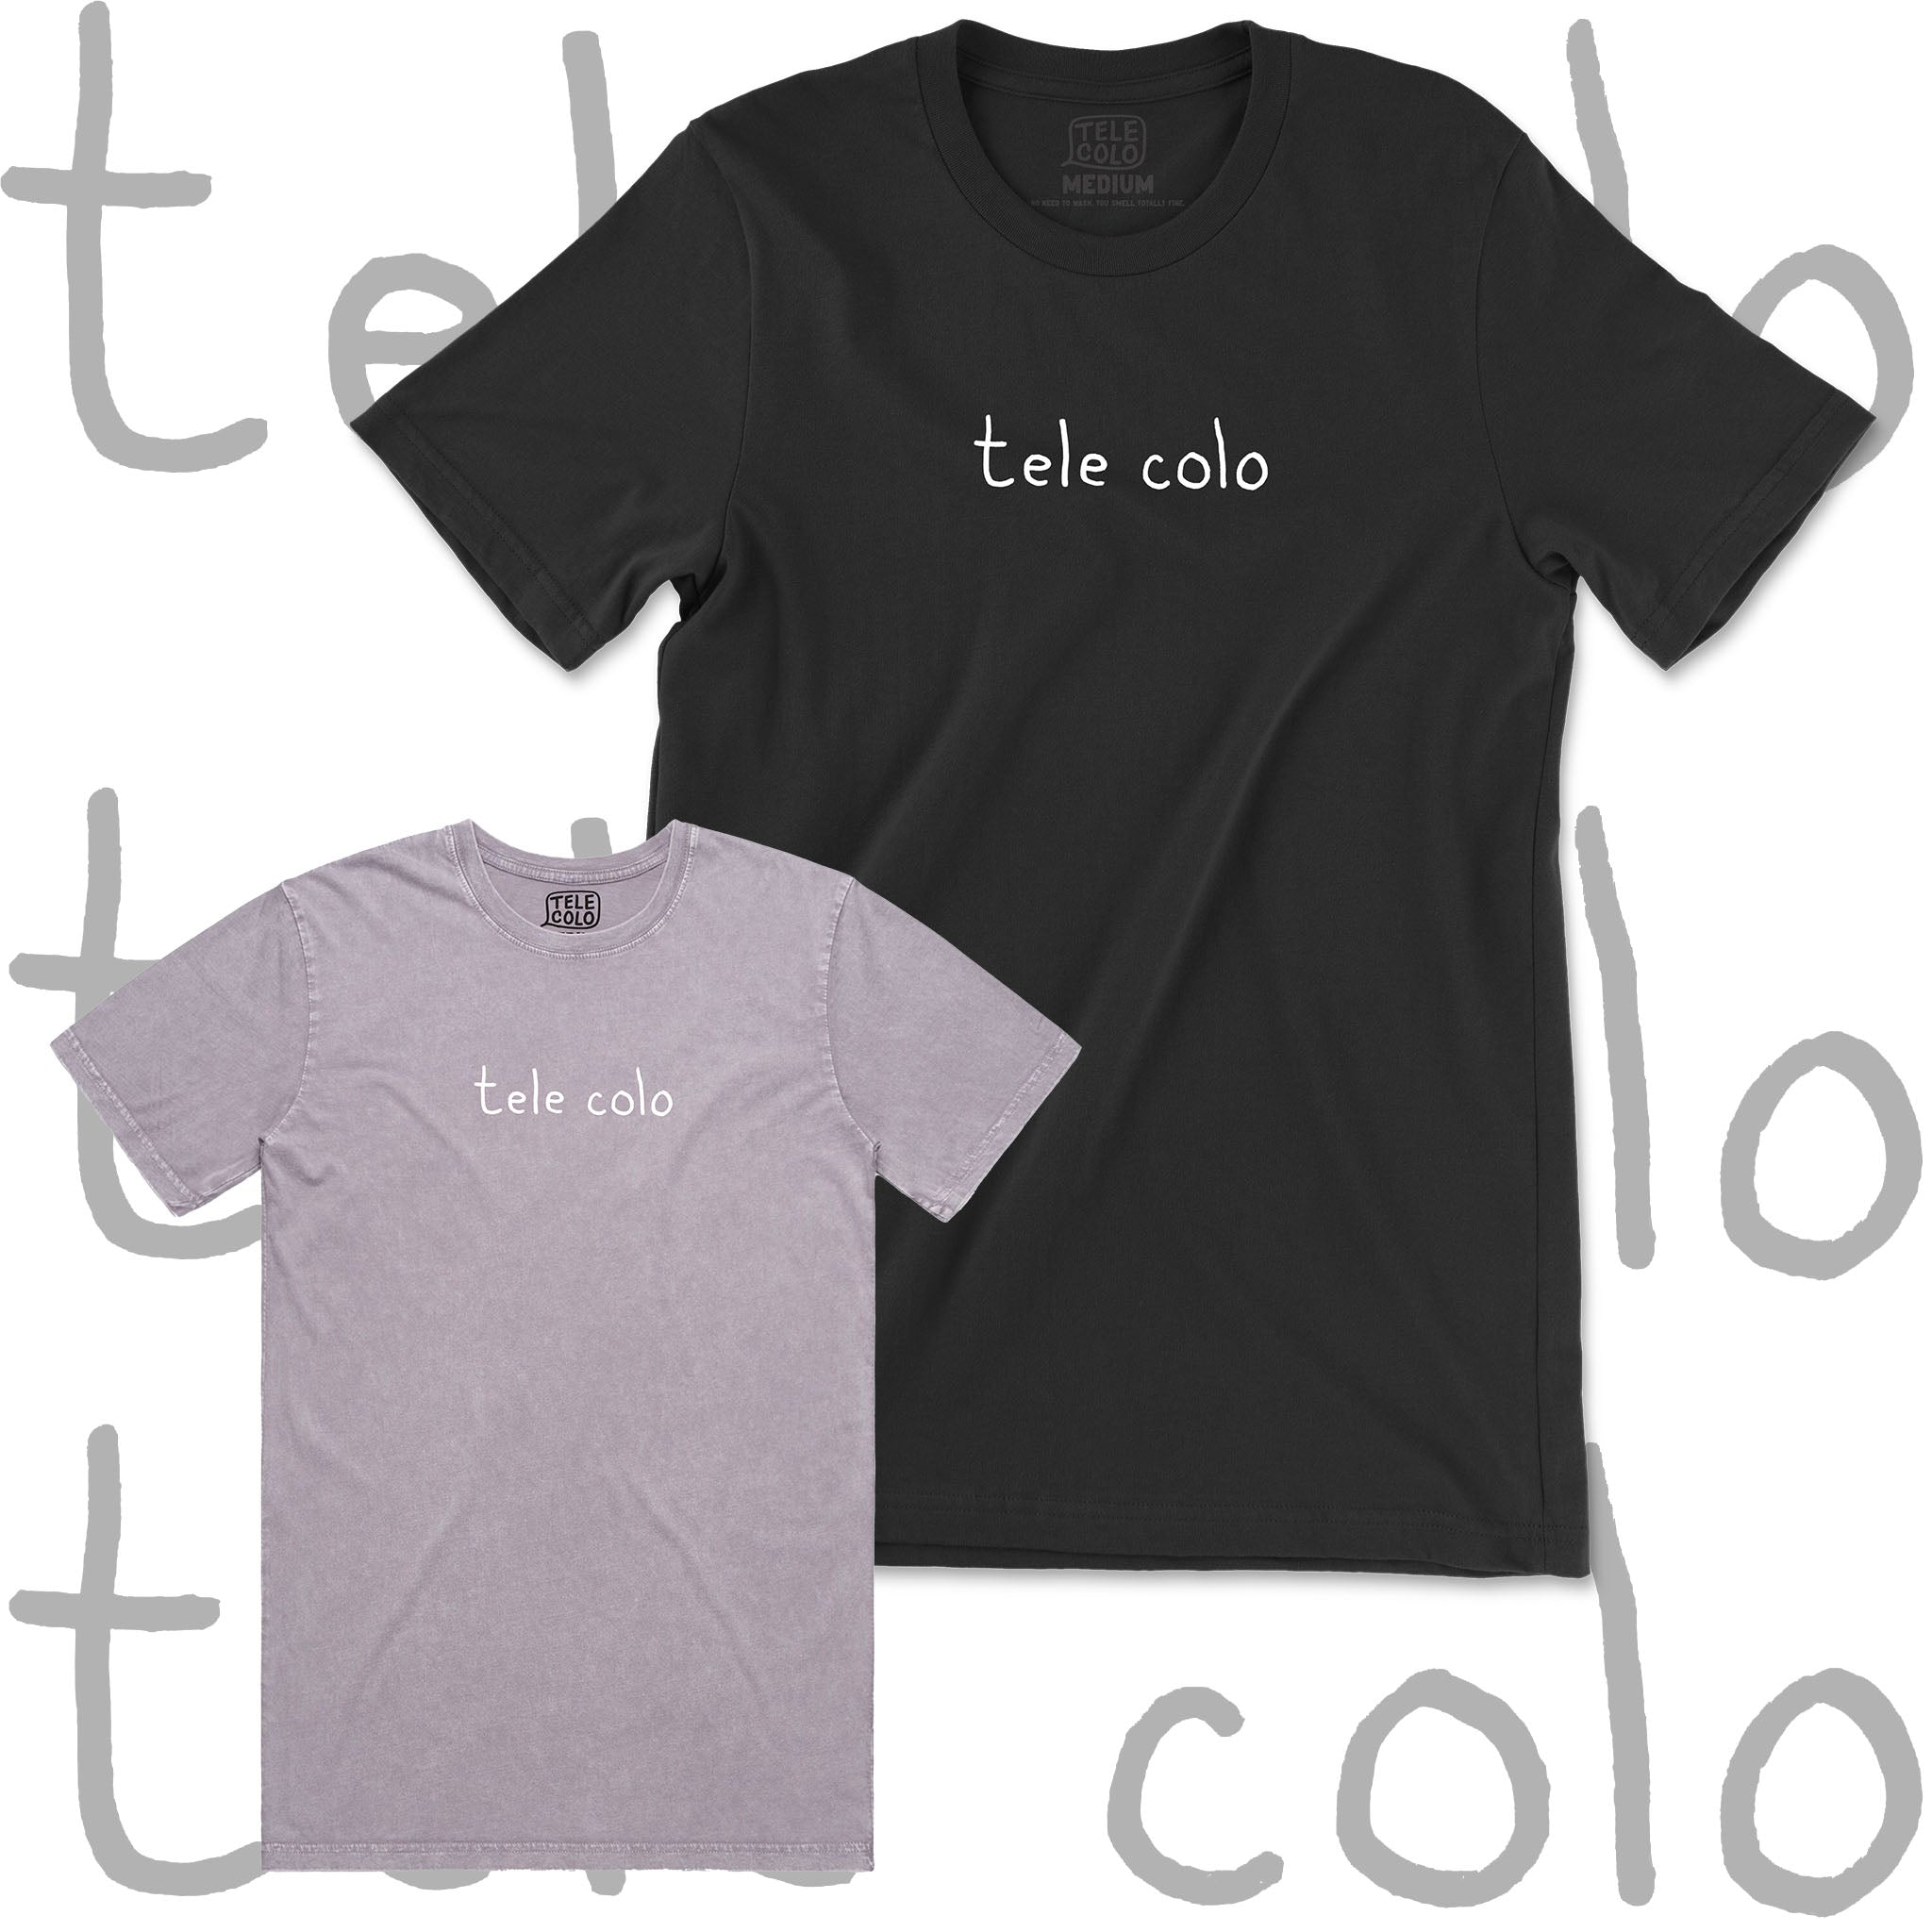 "tele colo scribble" Embroidered Tee